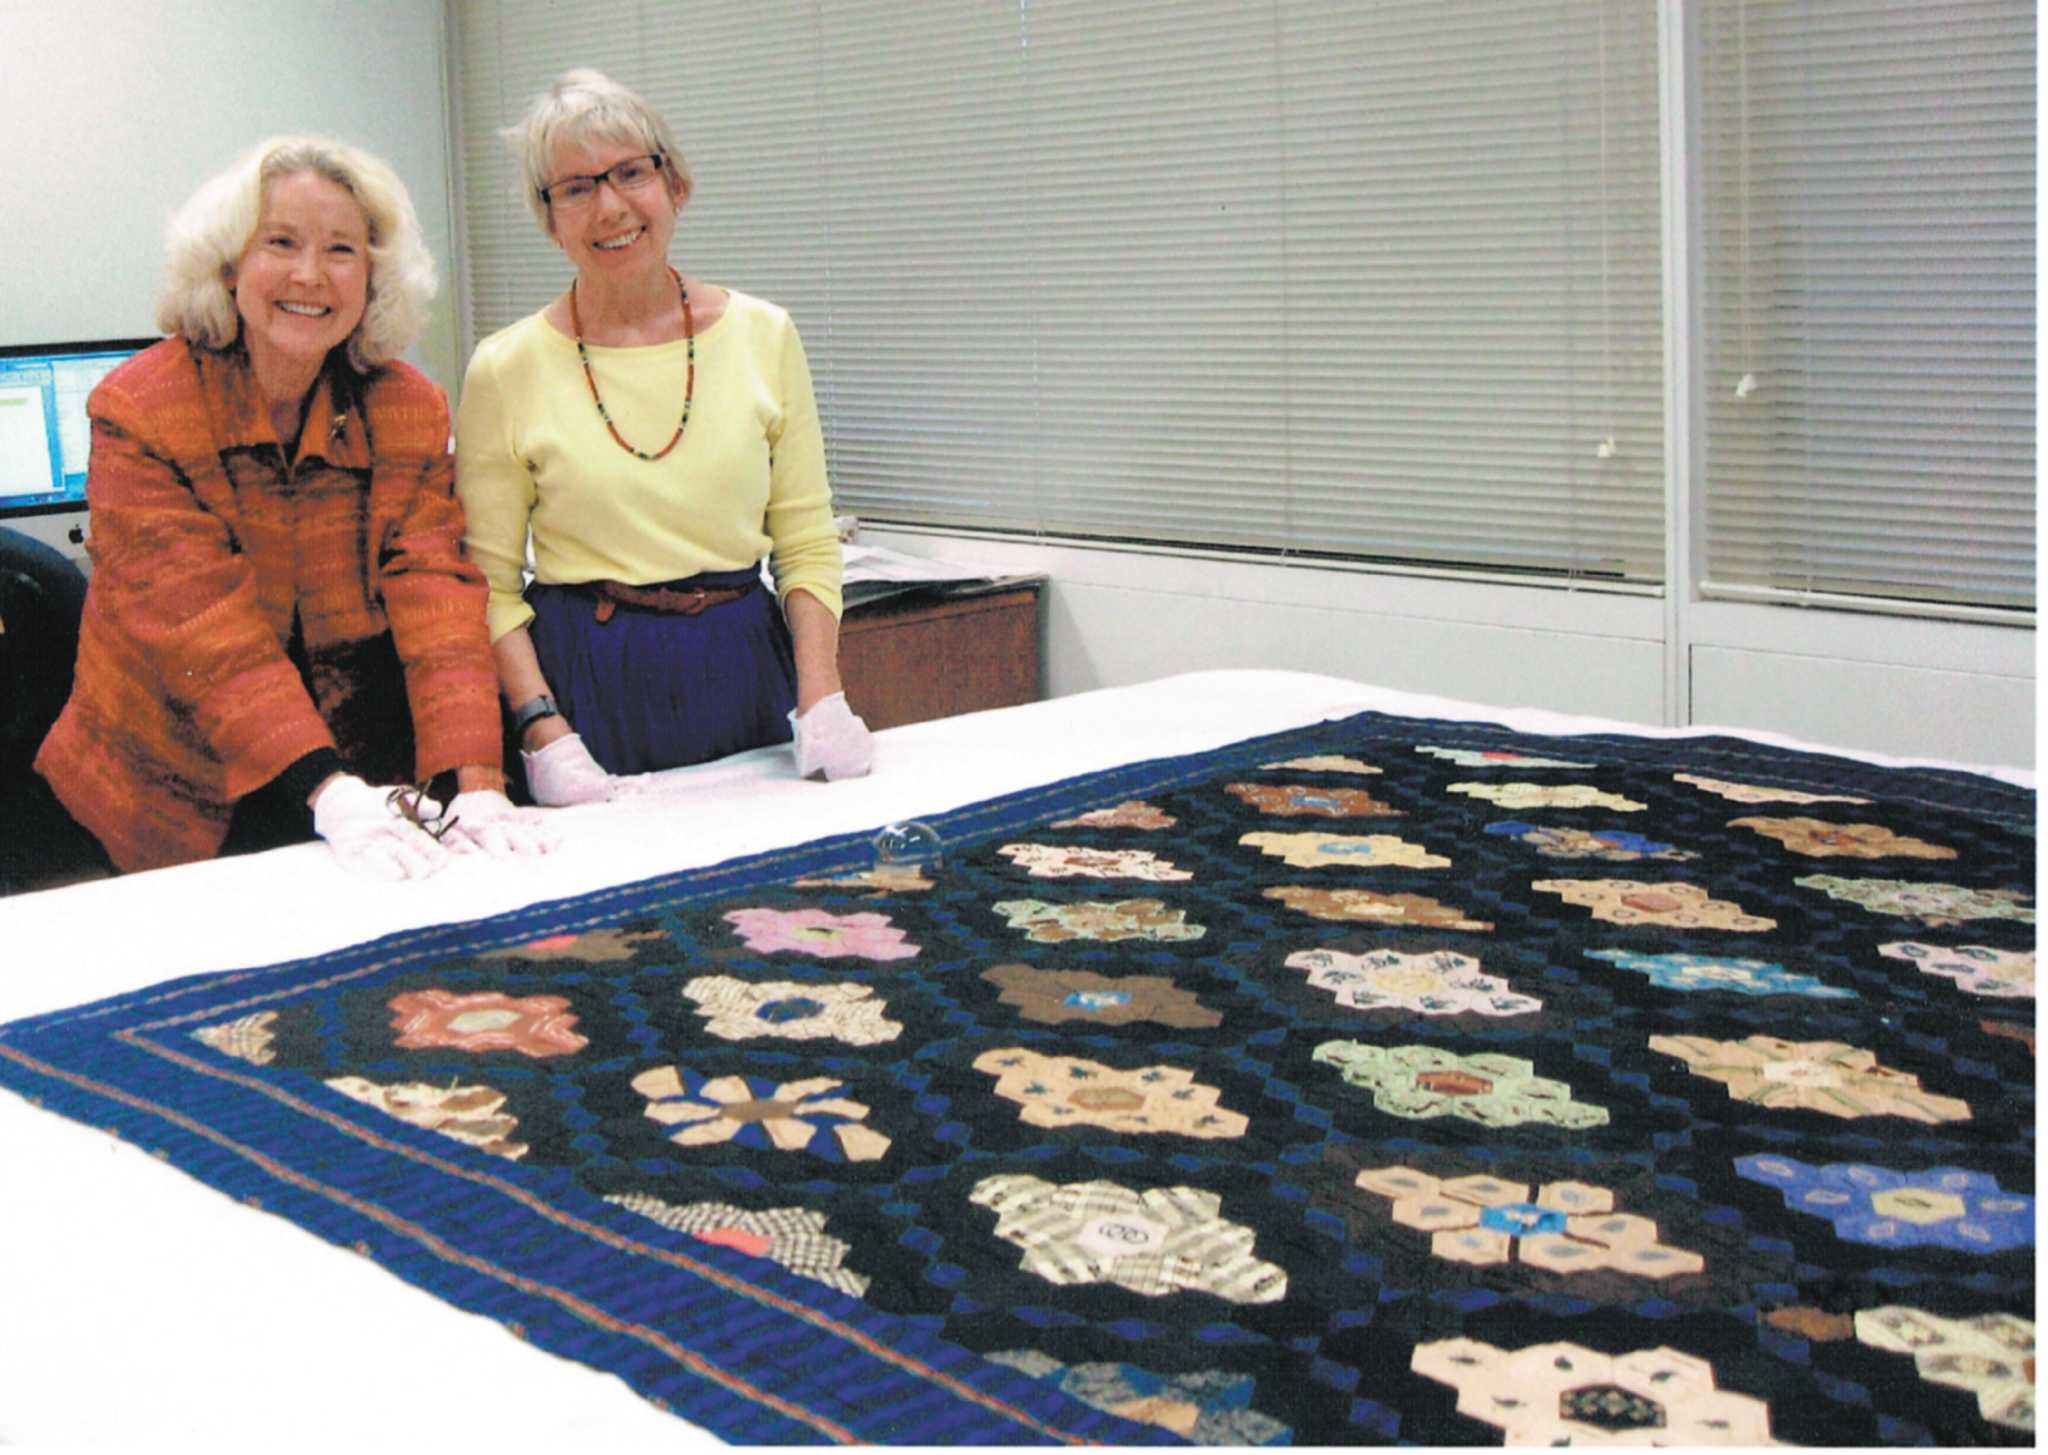 Rare Civil War quilt found in Texas has a mysterious story - Houston Chronicle